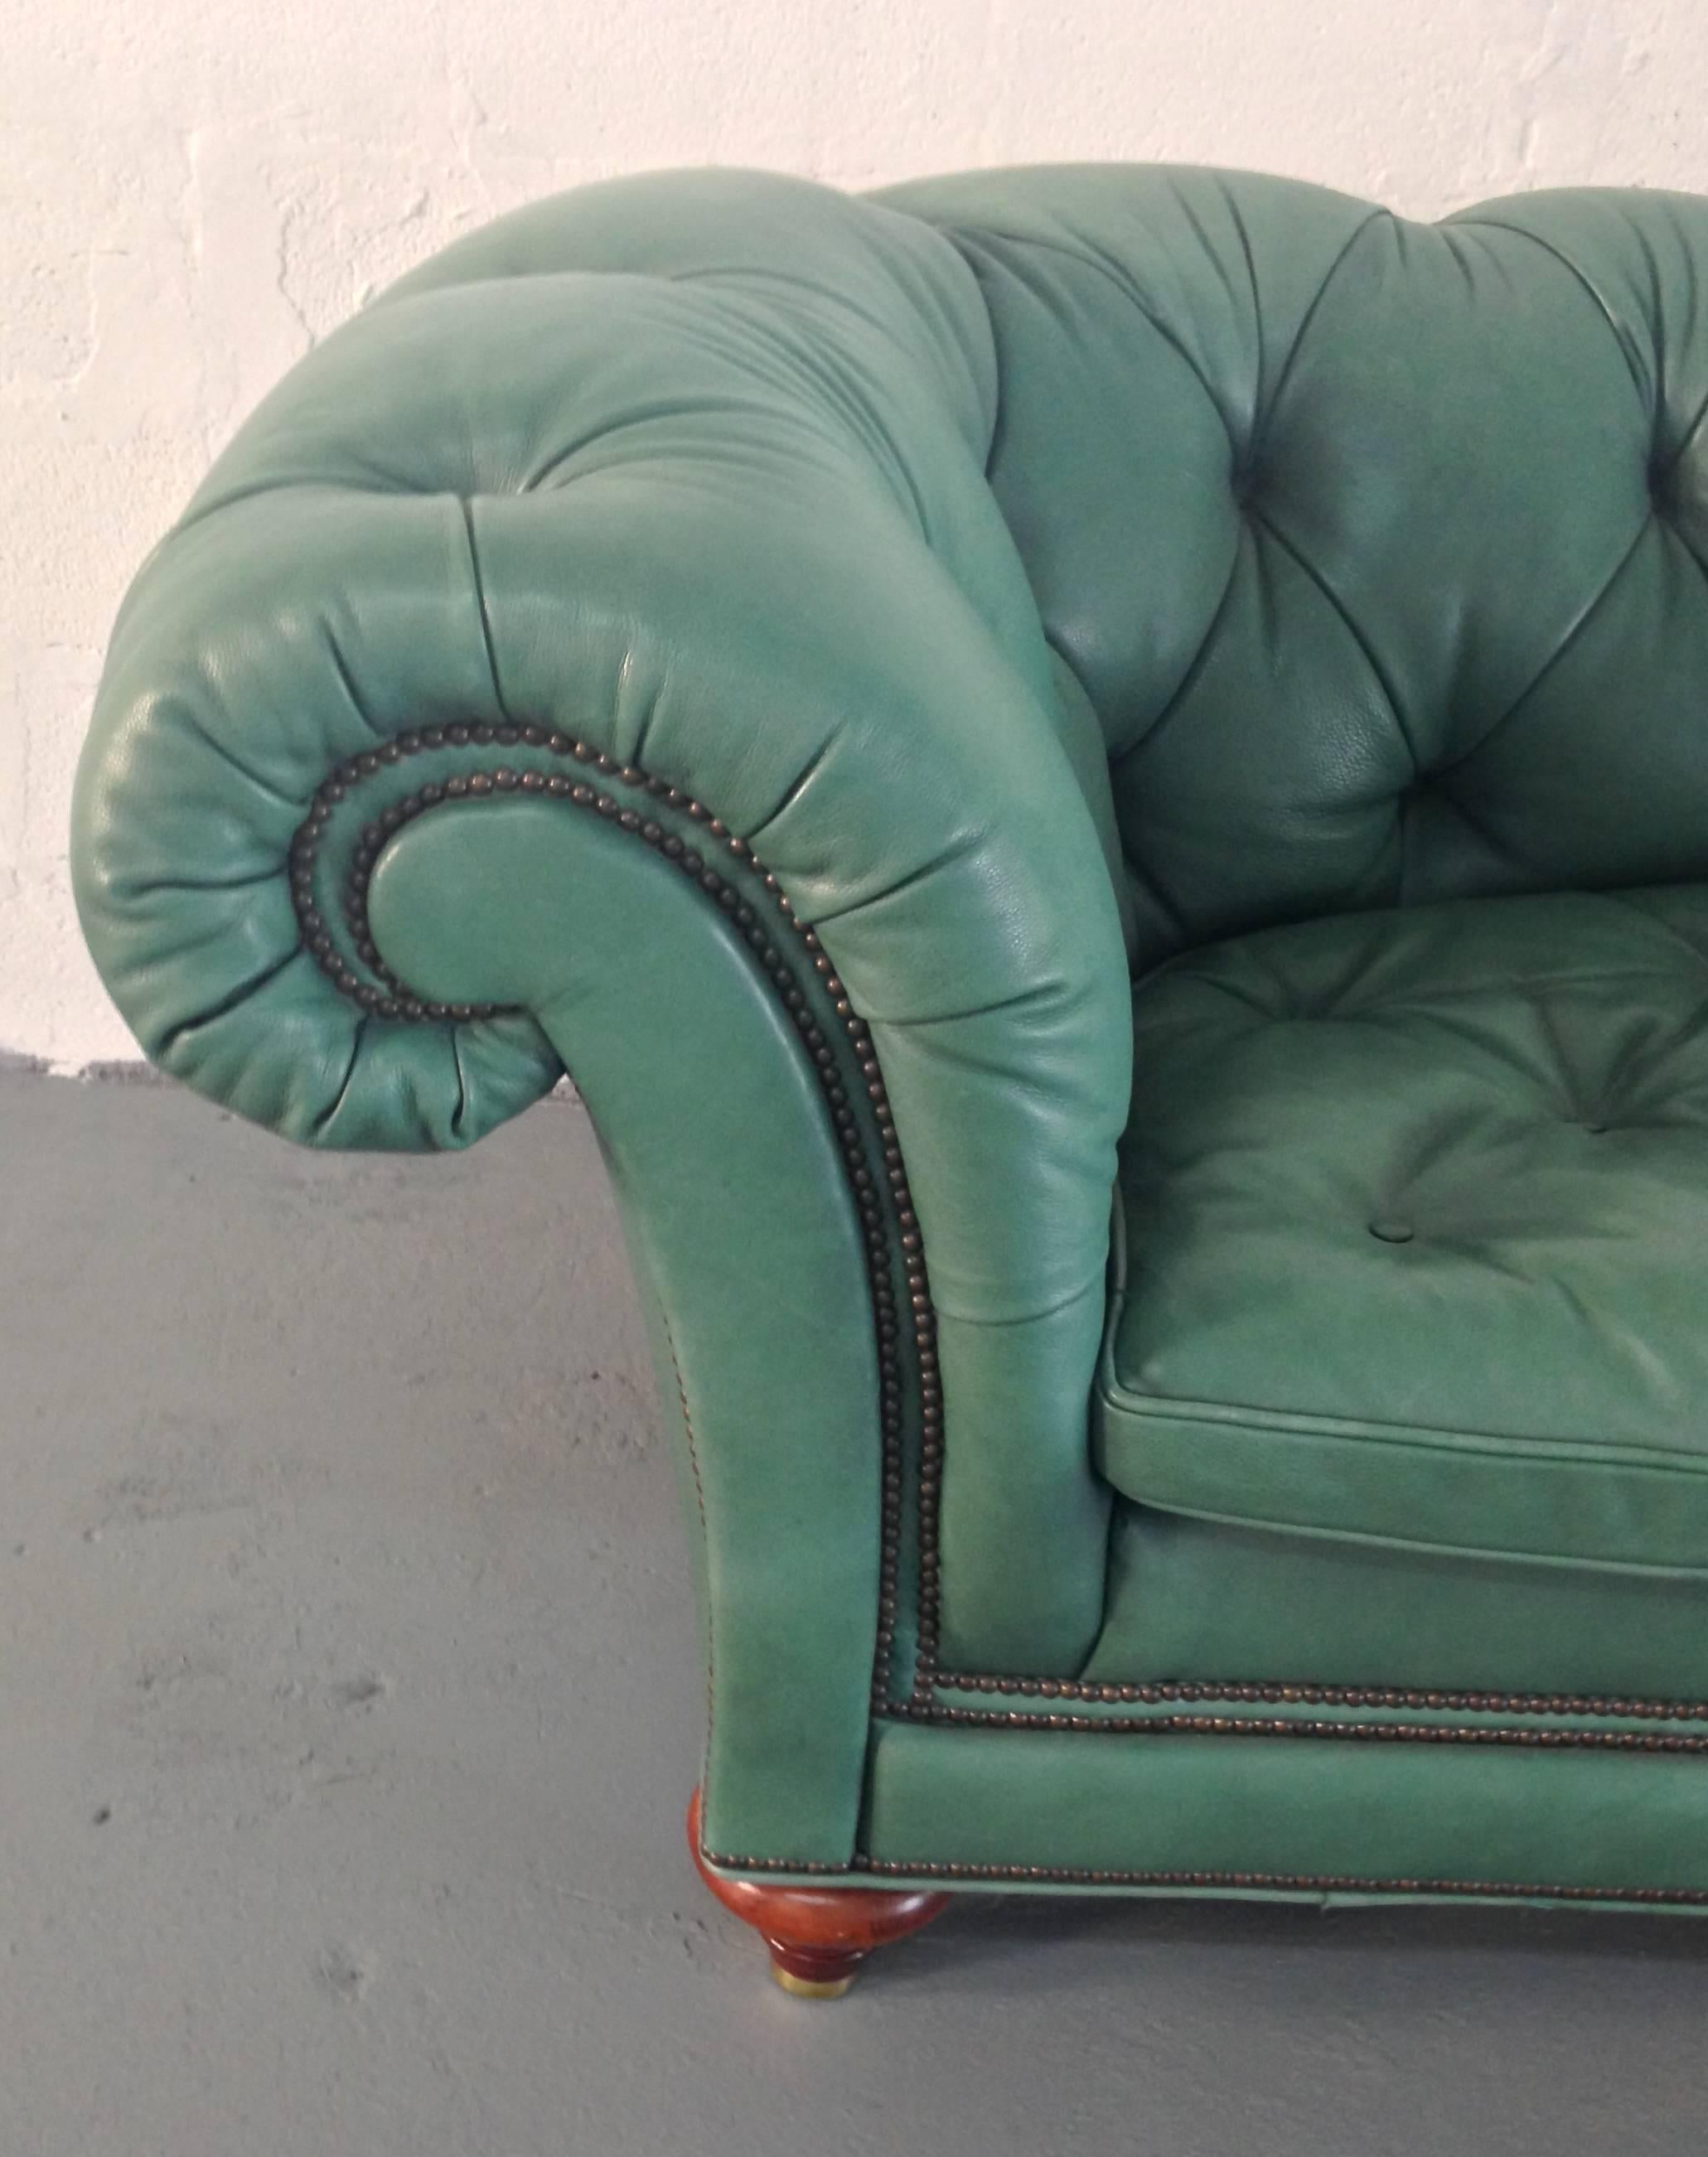 A large, comfortable and beautiful chesterfield sofa with original buttoned English green leather upholstery, brass nailhead trim, oversized scrolled arms and sculpted mahogany wood feet.